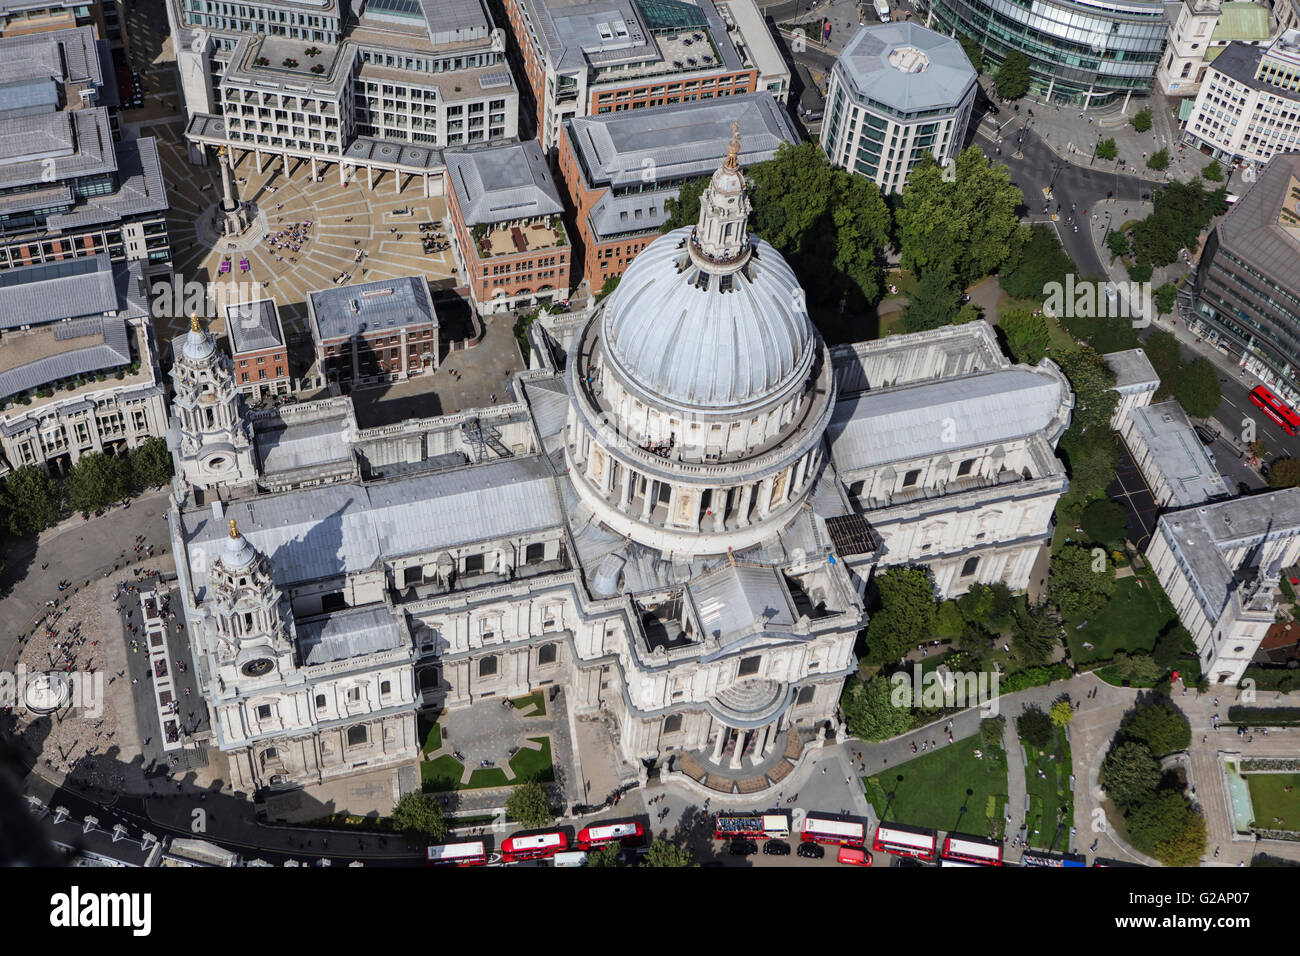 An aerial view of St Pauls Cathedral, London Stock Photo